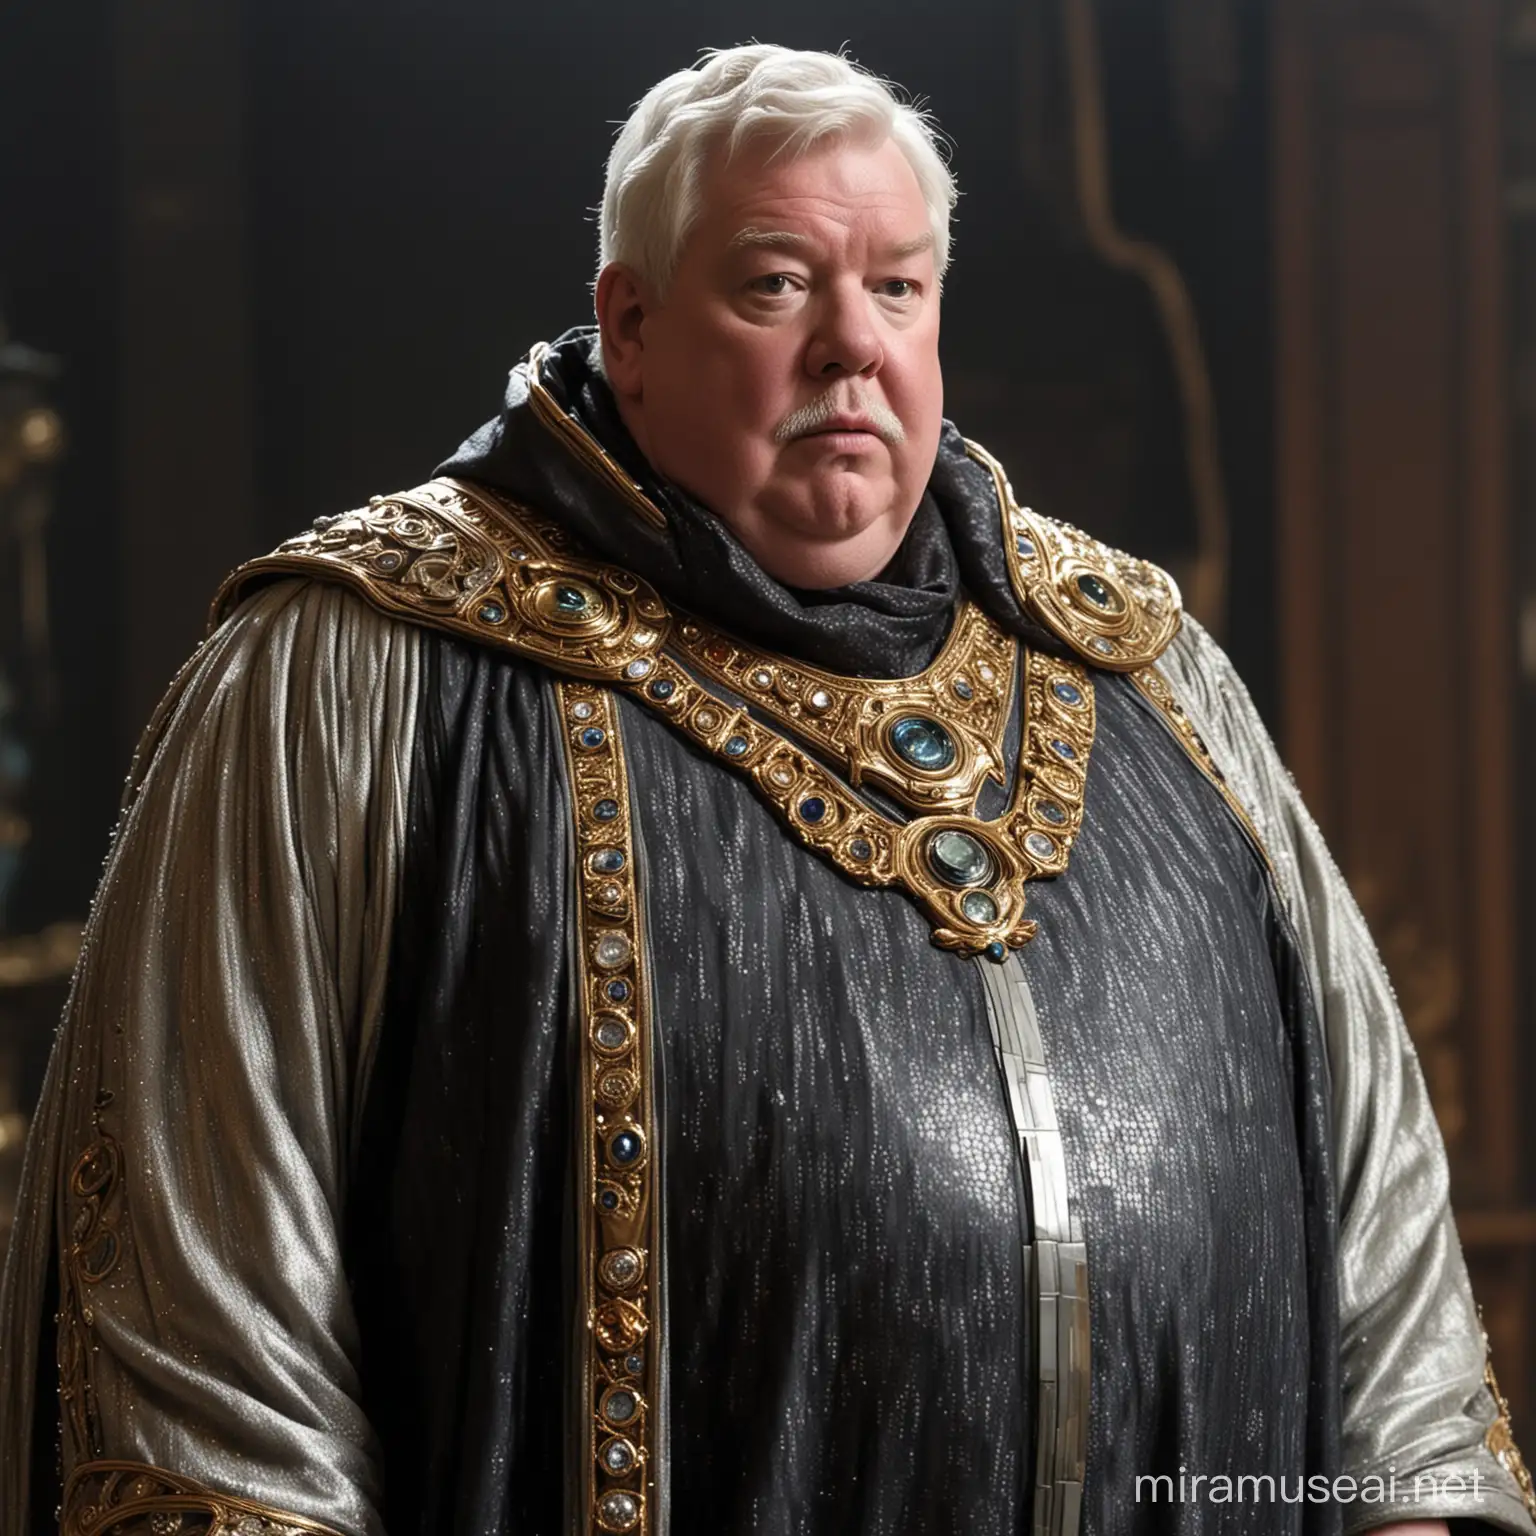 An obese Richard Griffiths as a galactic senator wearing opulent futuristic robes